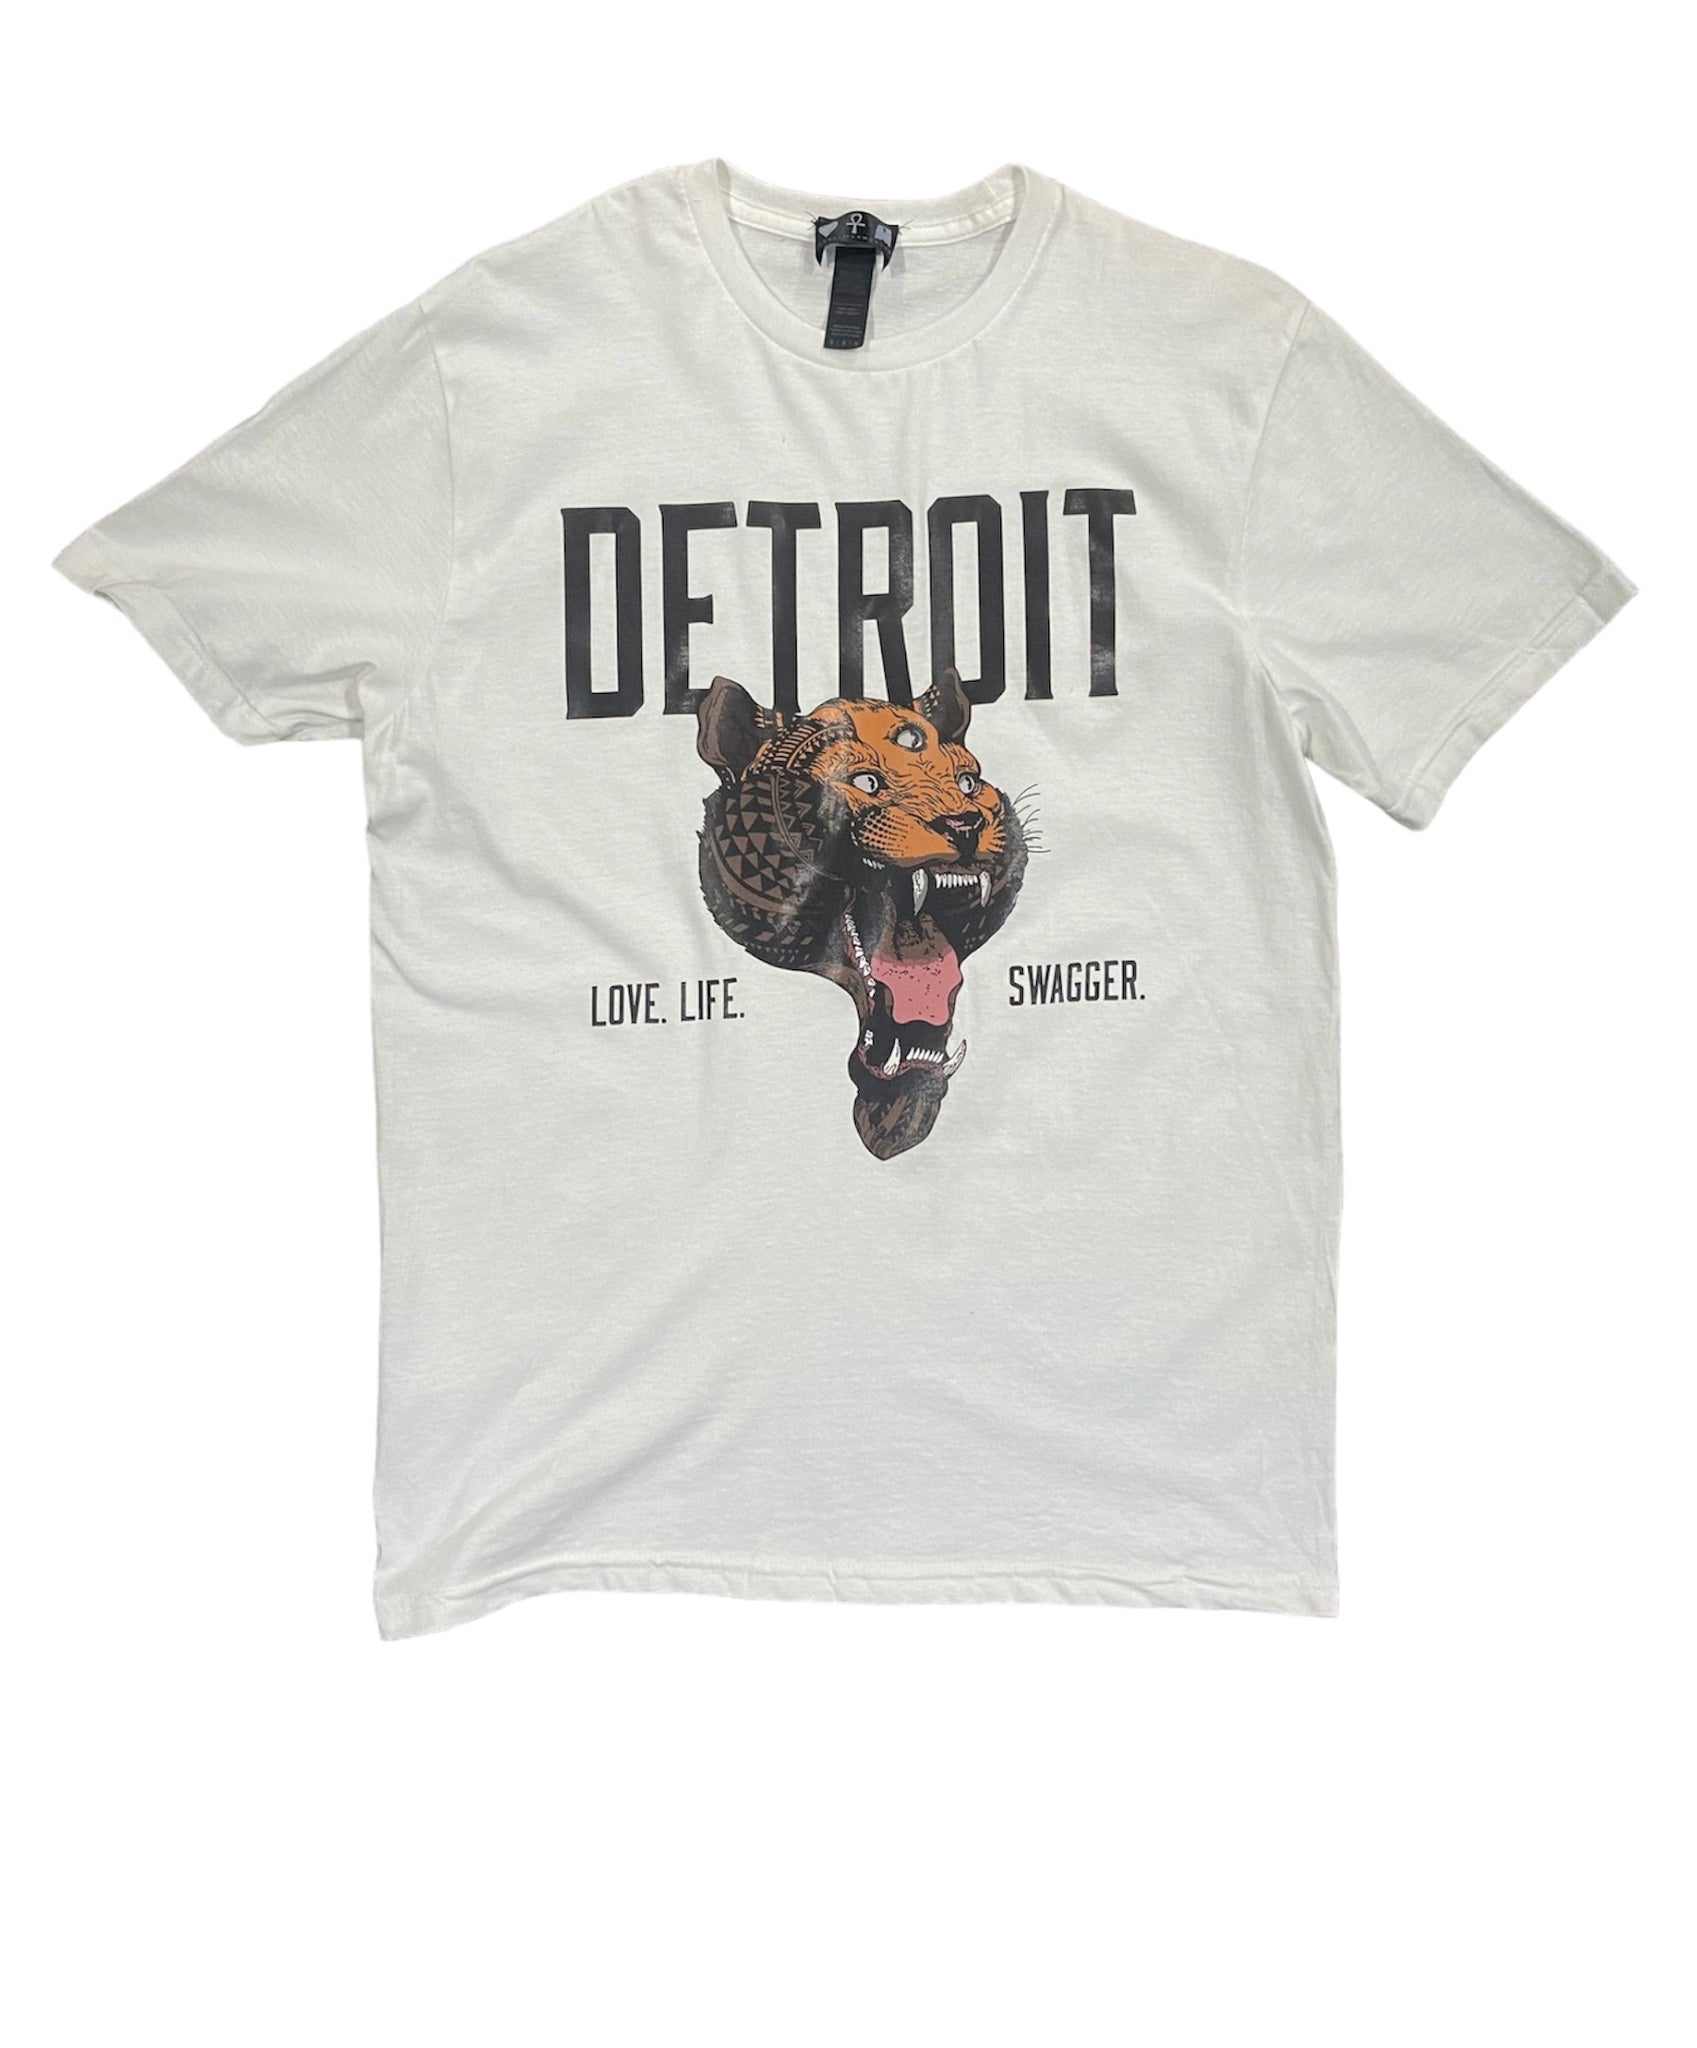 LOVE LIFE SWAGGER DETROIT TEE WHITE